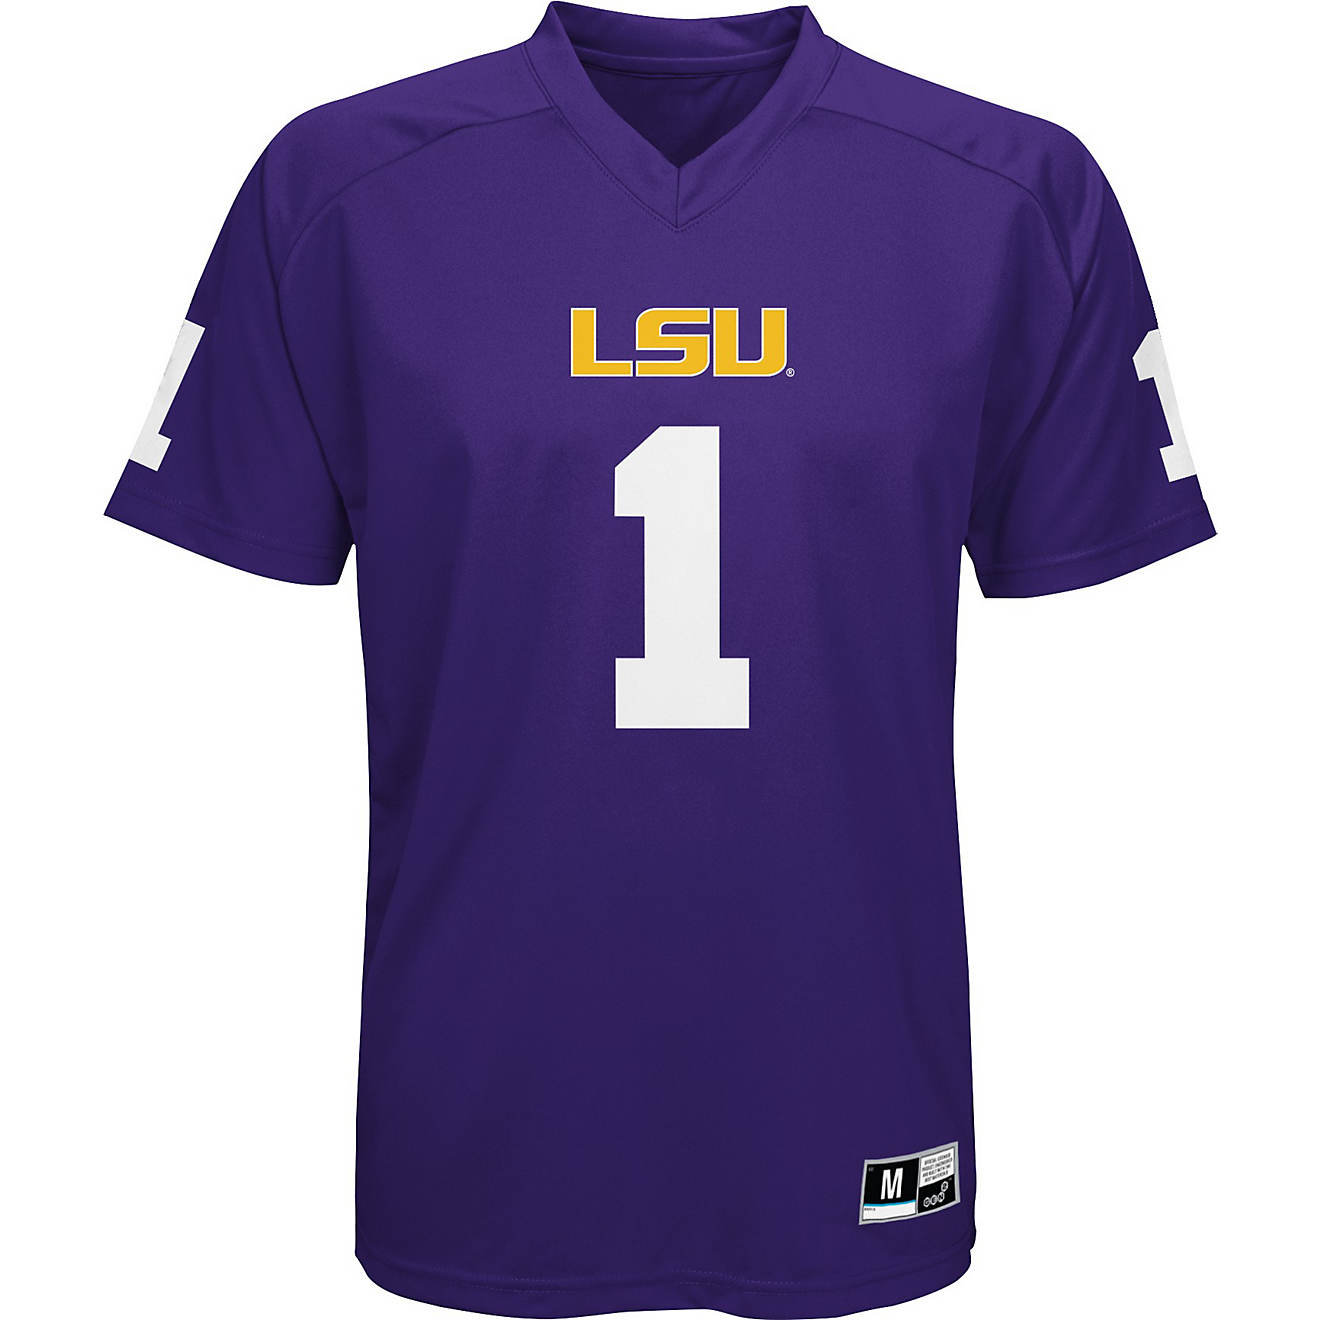 Outerstuff Boys' Louisiana State University Performance Short Sleeve T-shirt                                                     - view number 1